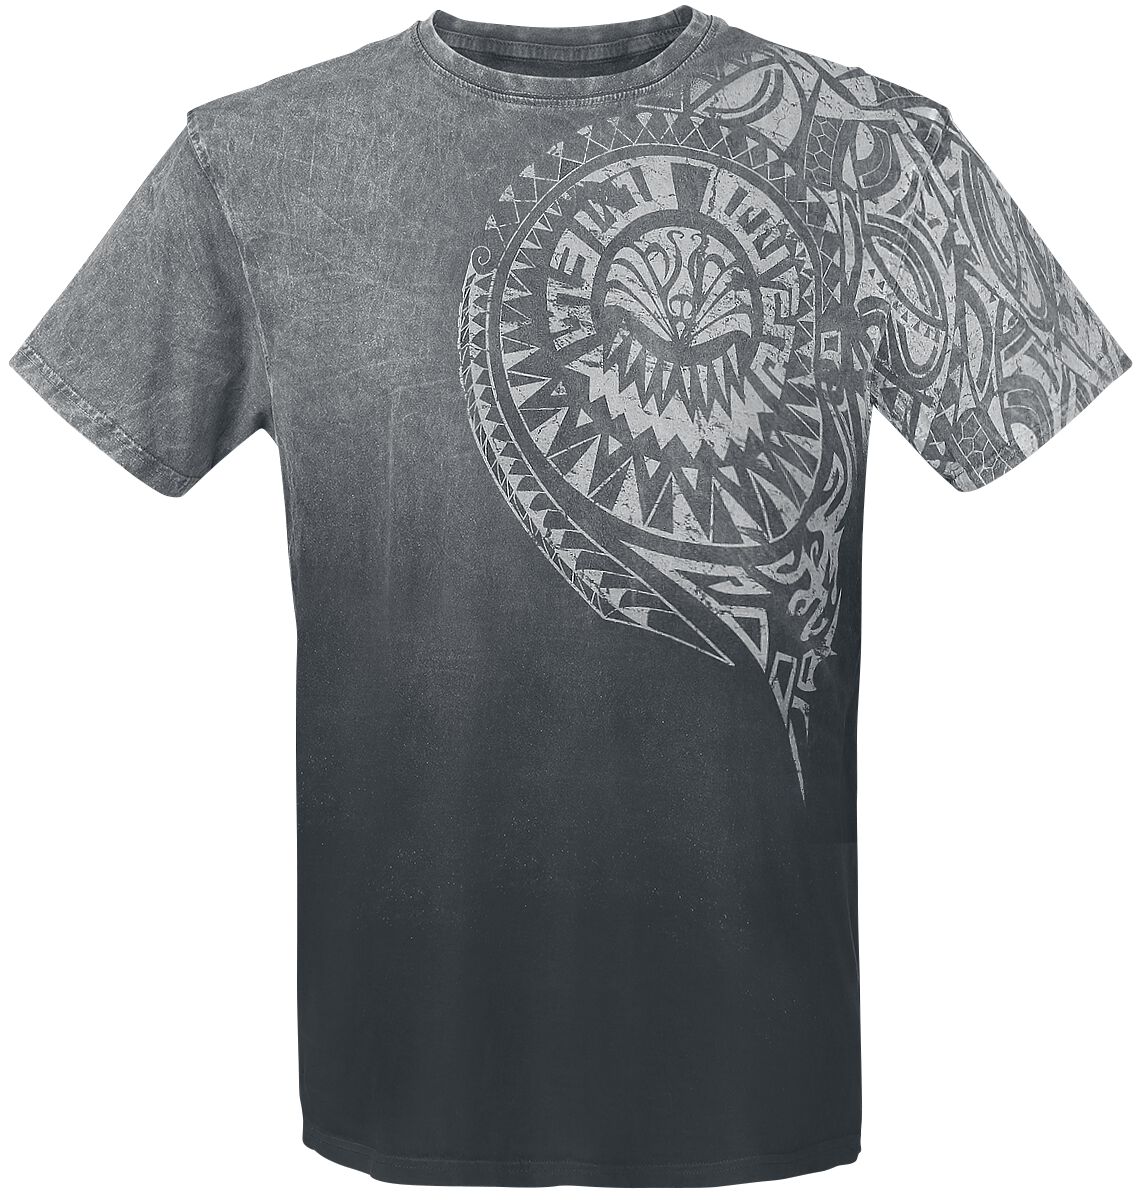 Outer Vision Burned Tattoo T-Shirt grau in 3XL